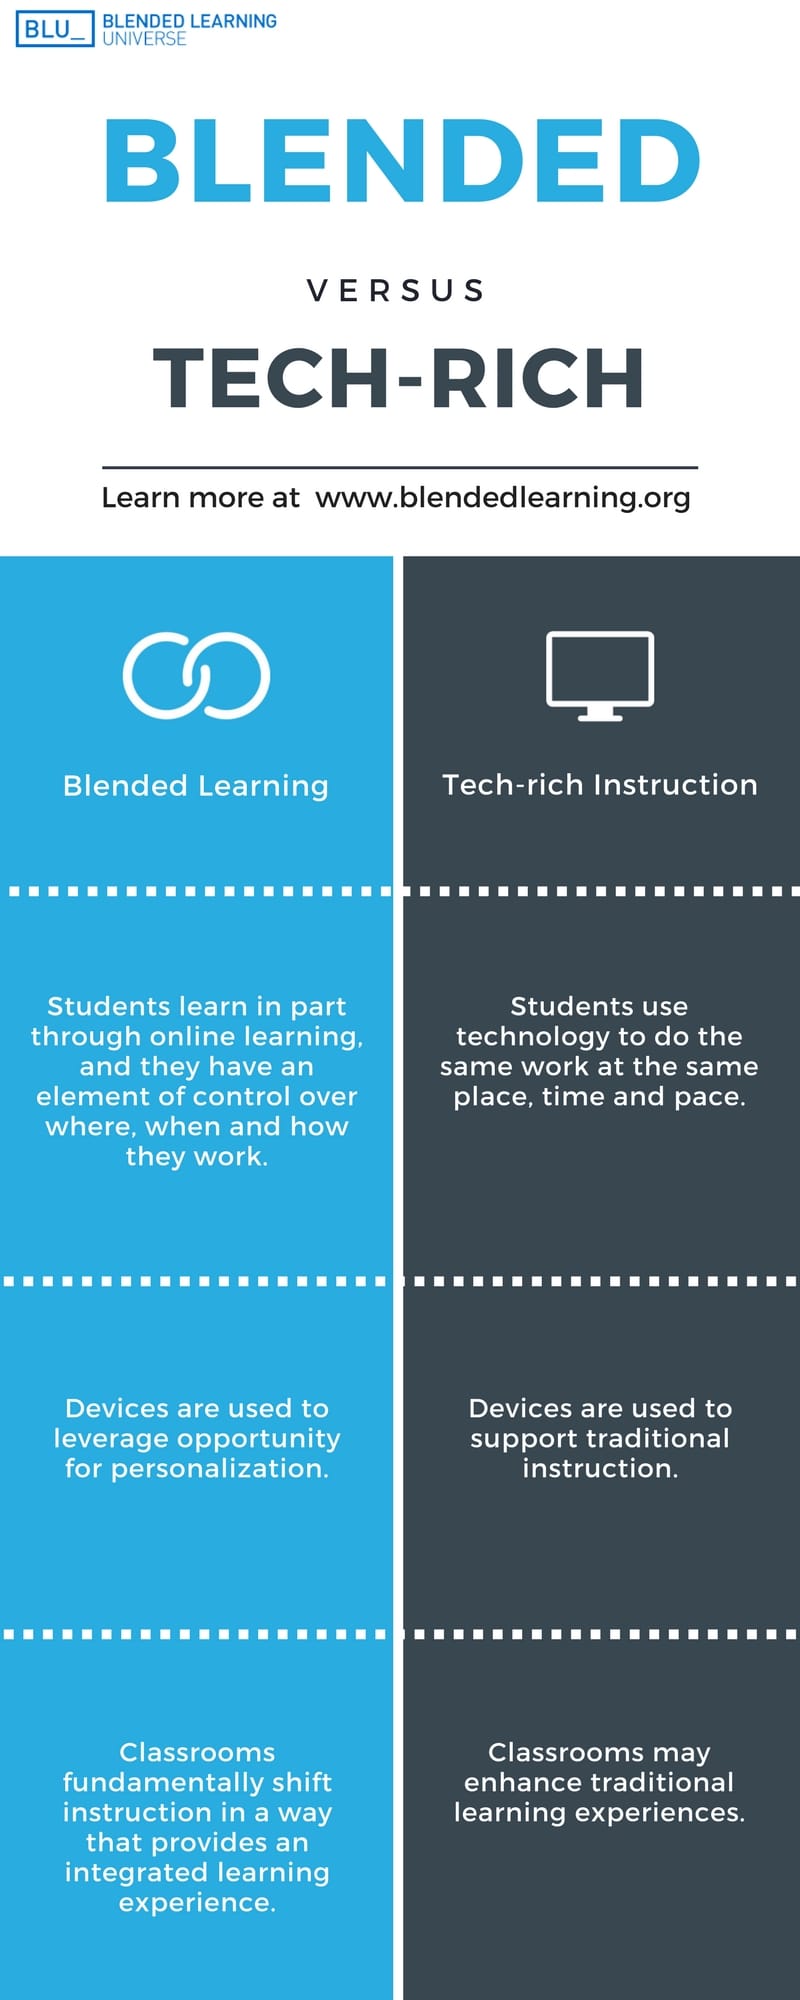 What blended learning is and isn't - Blended Learning UniverseBlended Learning Universe